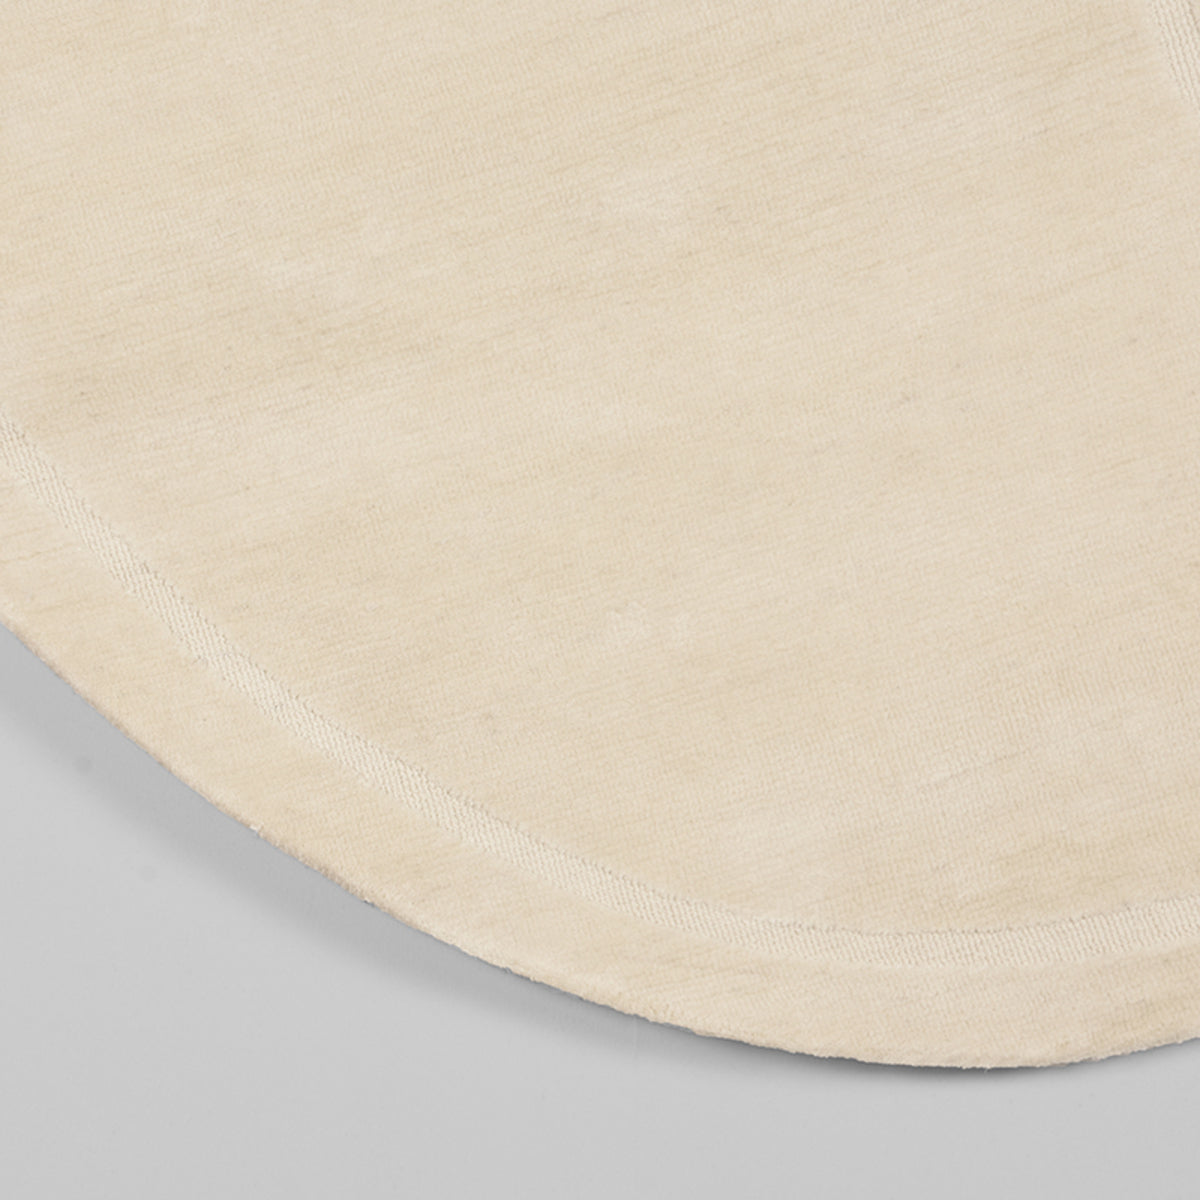 LABEL51 Rugs Mody - Ivory - Synthetic - 200x300 cm